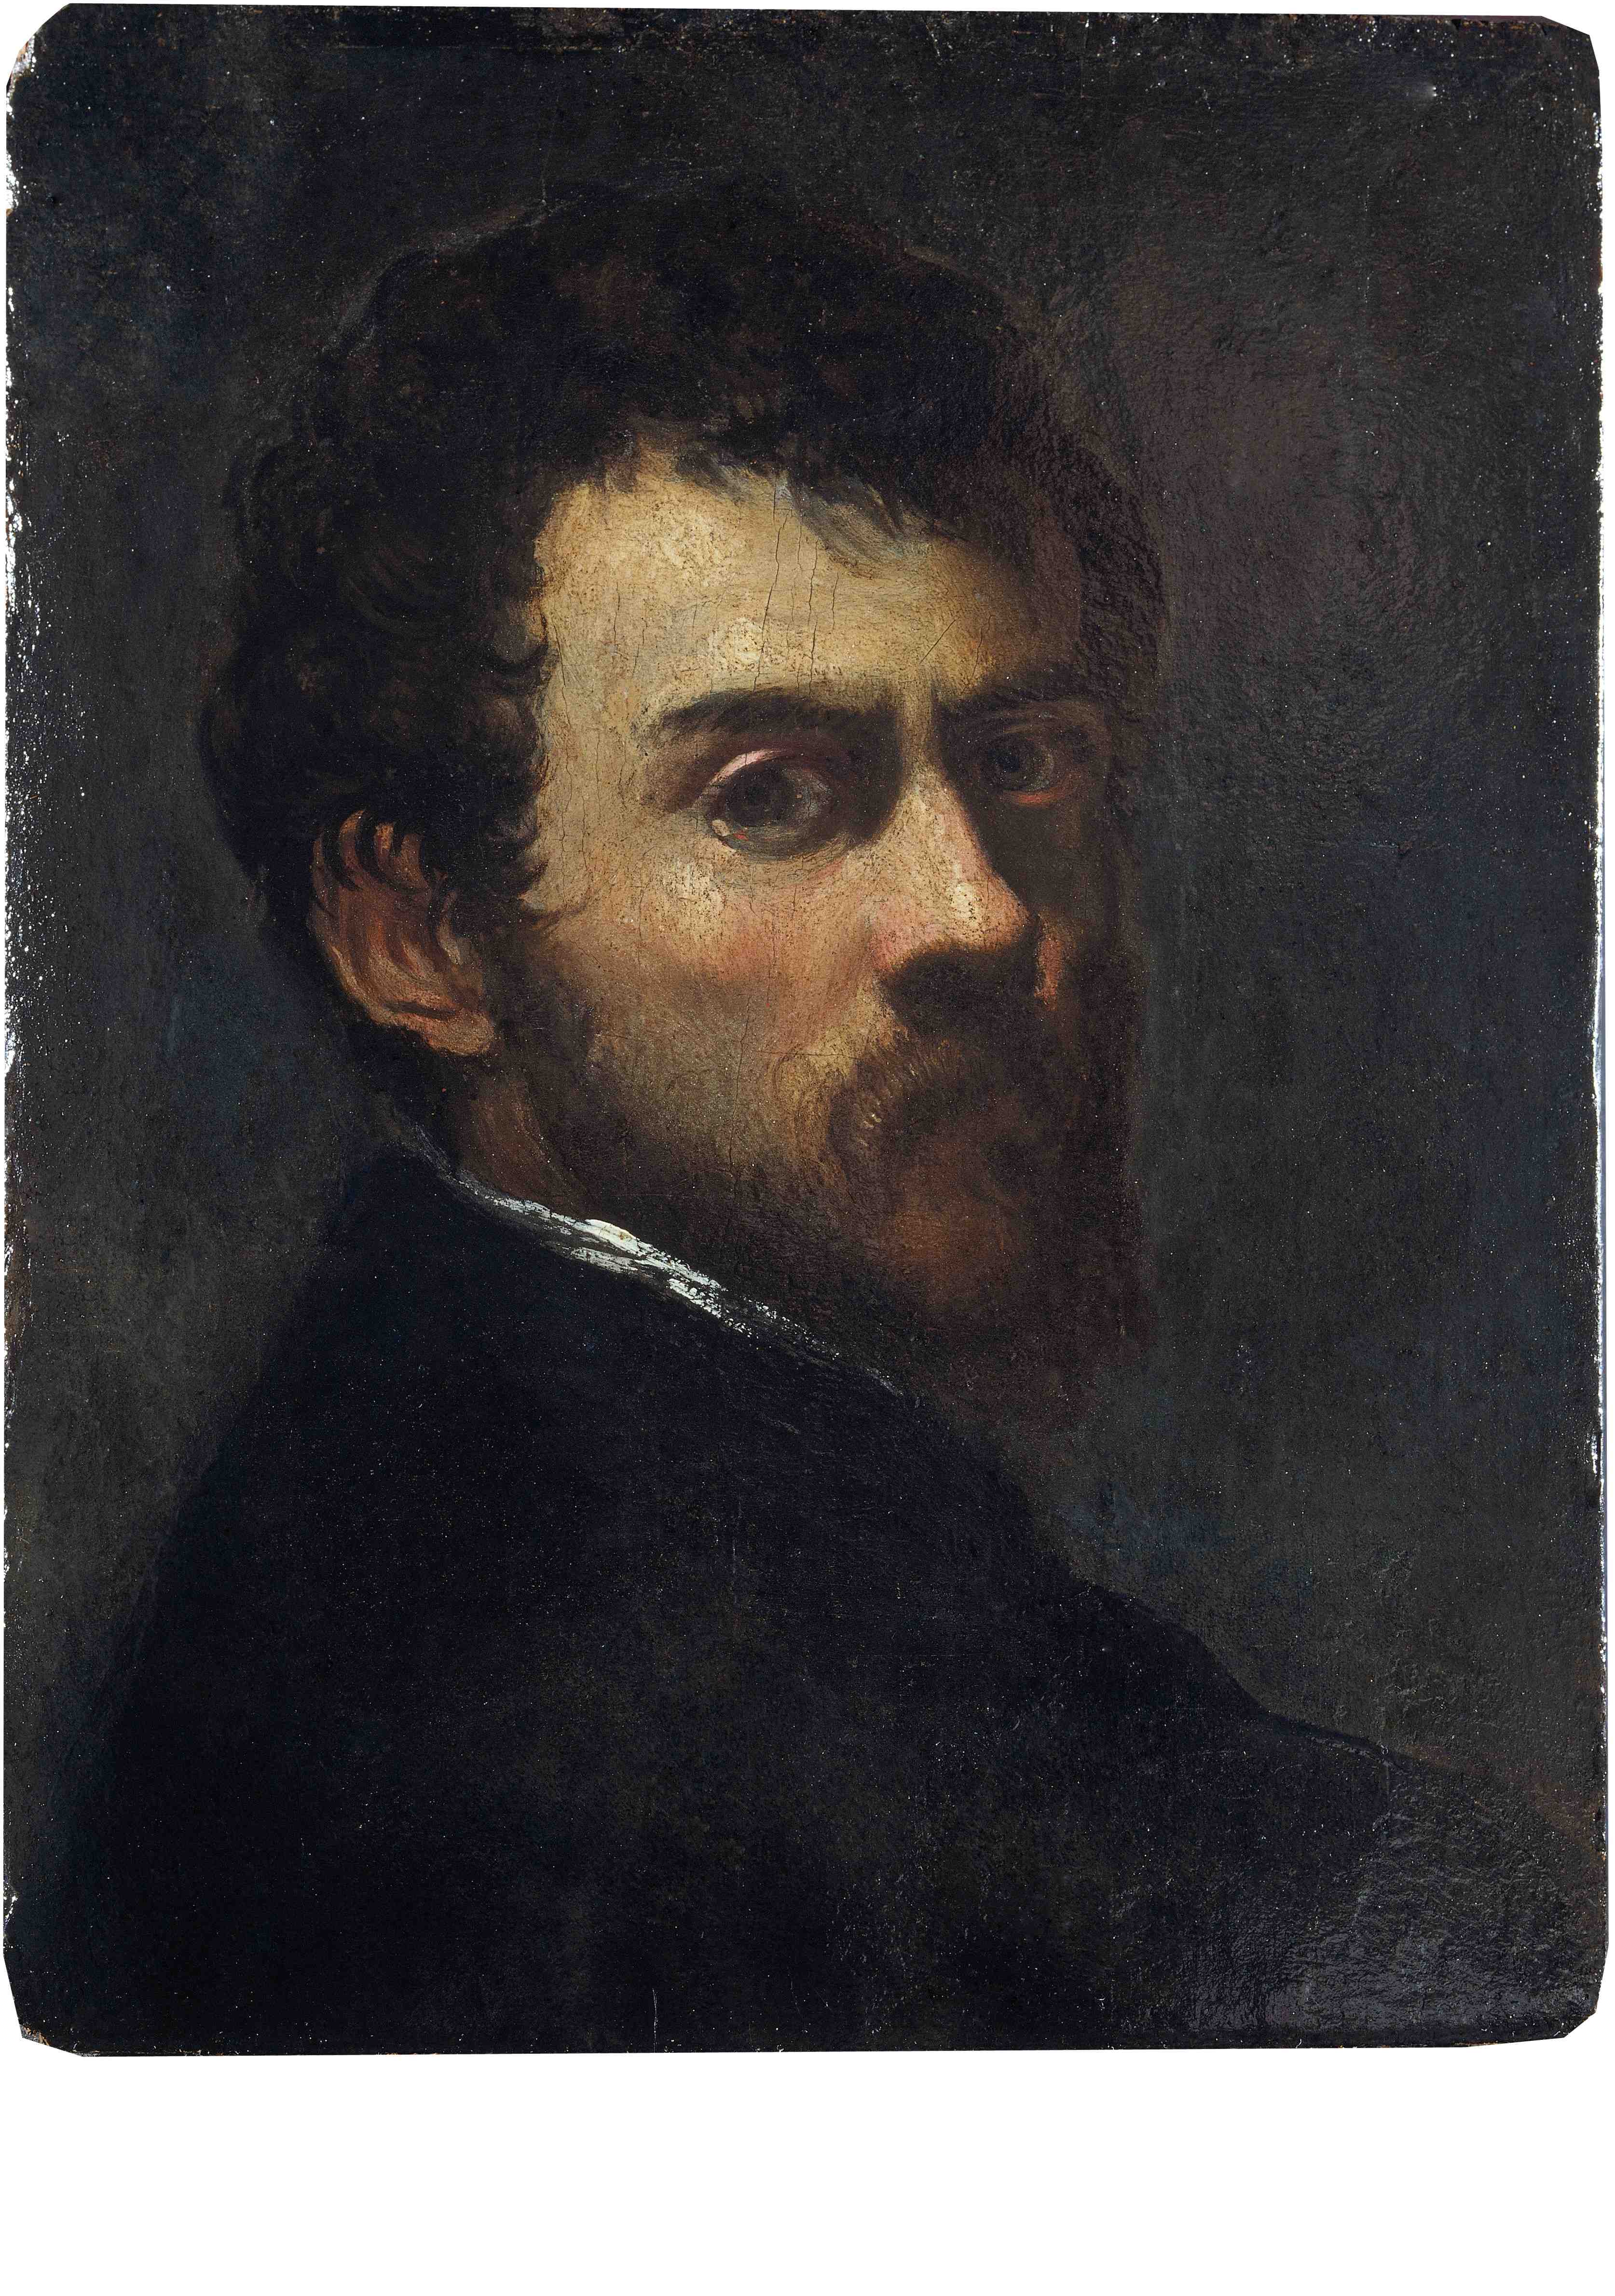 Tintoretto – Autoritratto come giovane uomo – 1548 – Victoria and Albert Museum. Bequeathed by Constantine Alexander Ionides